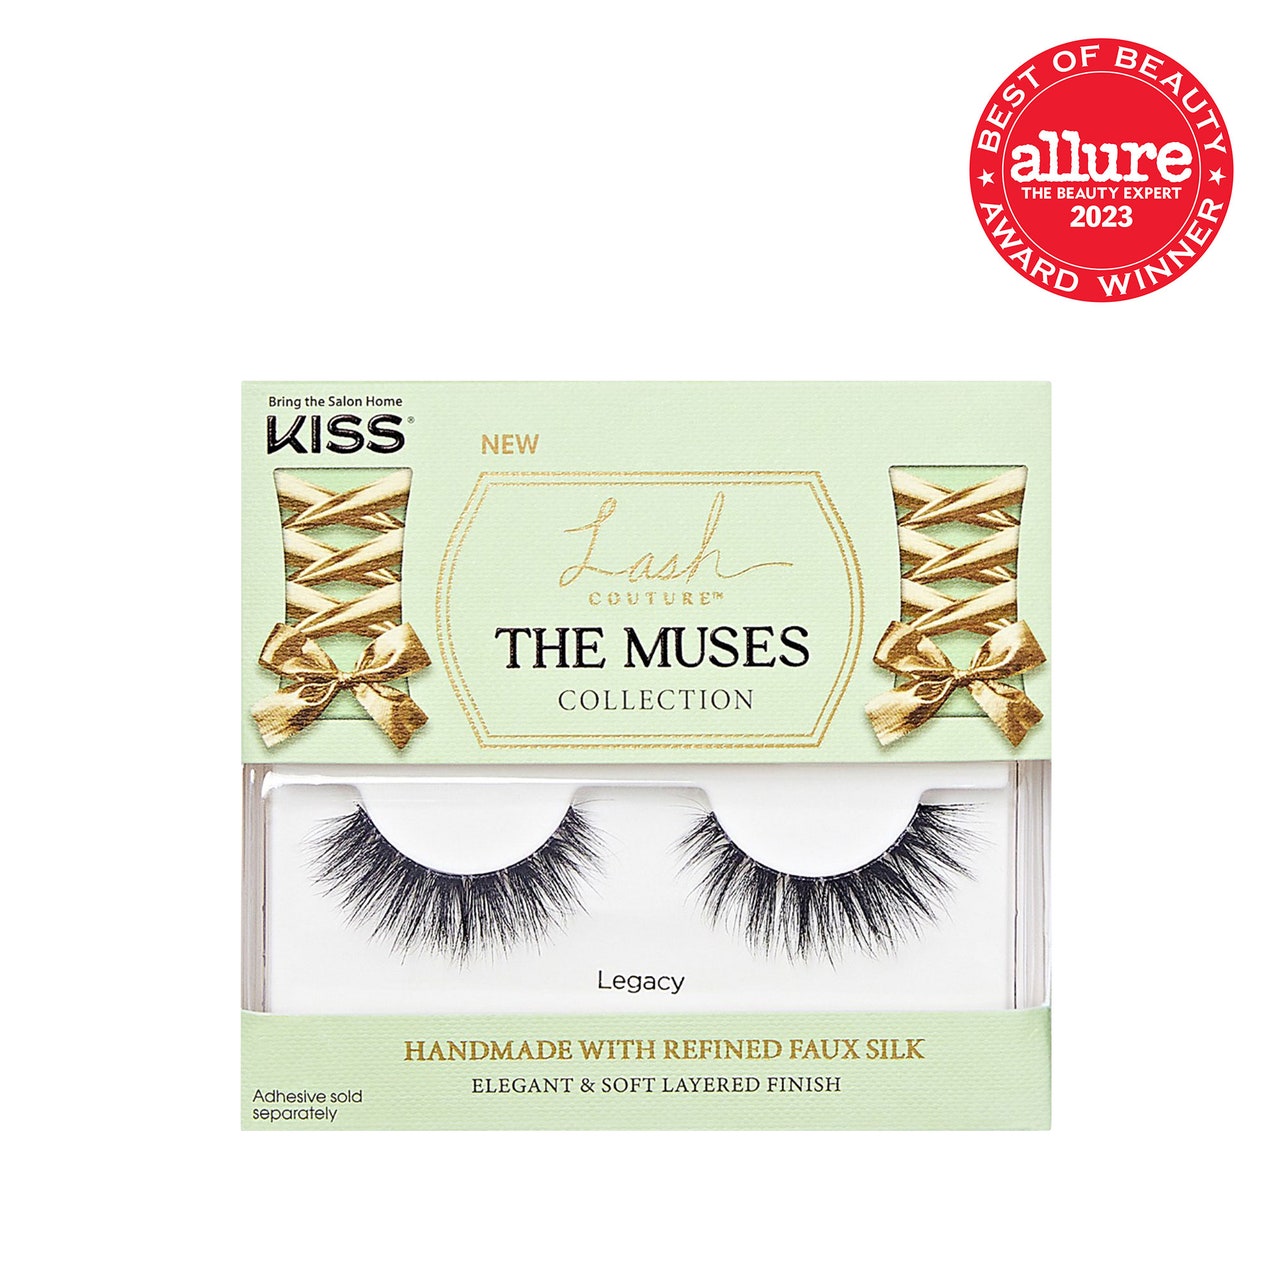 Kiss Lash Couture The Muses pale green box of false lashes on white background with red Allure BoB seal in the top right corner